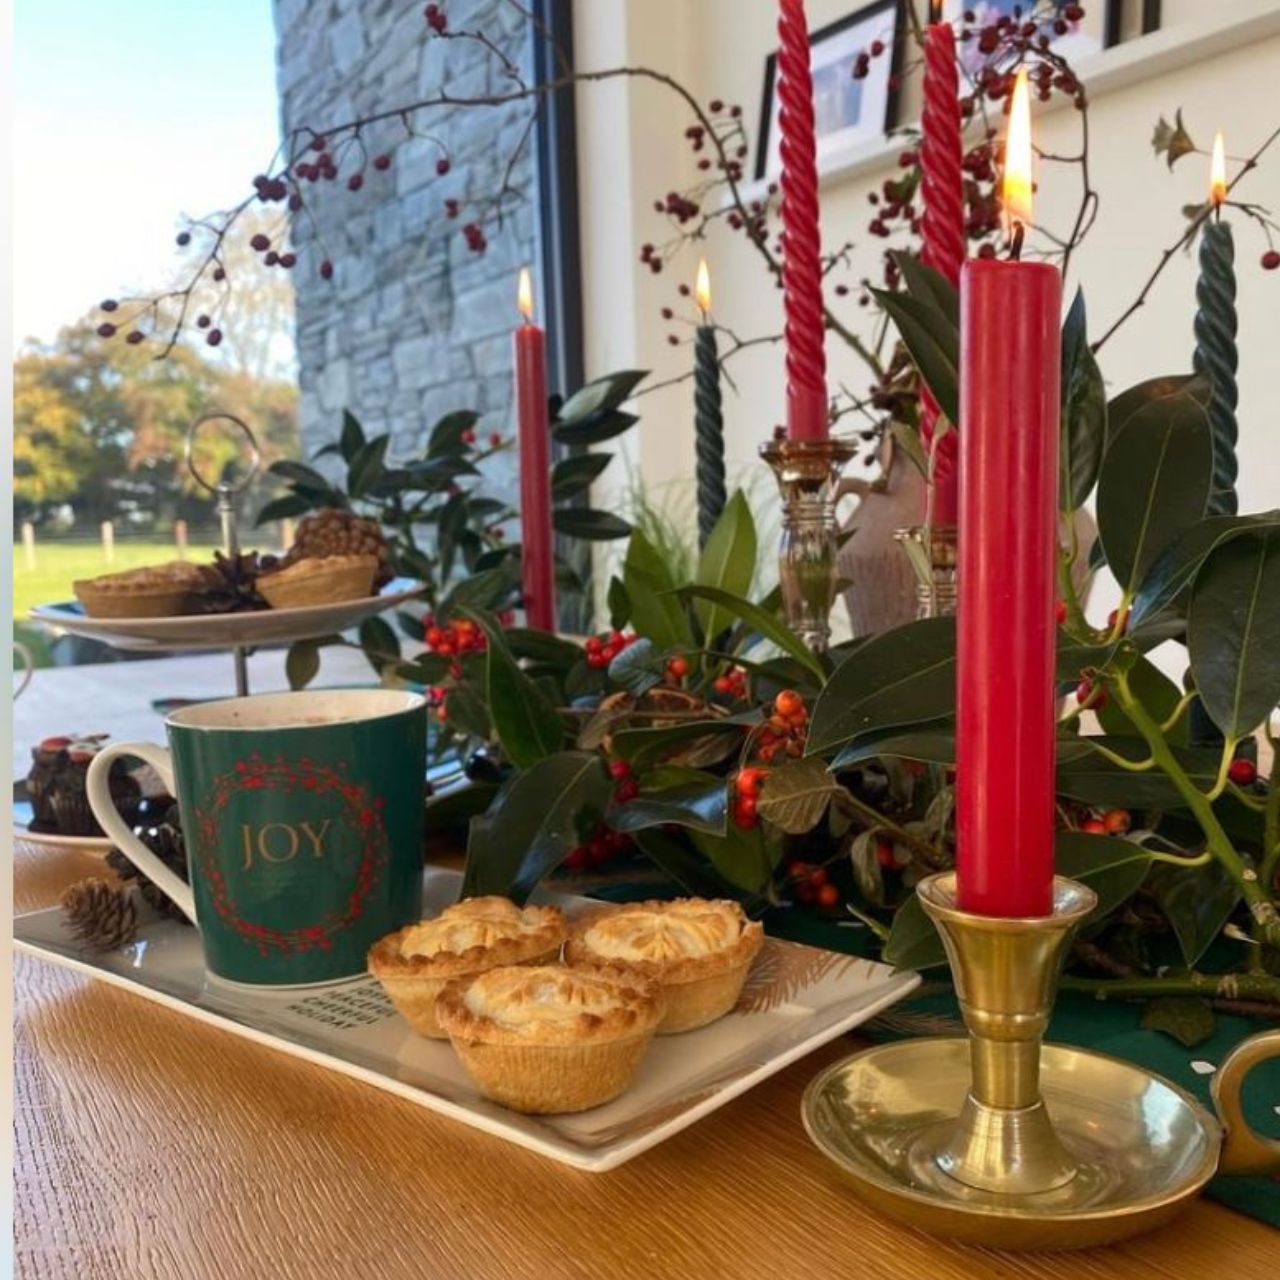 Christmas Festive Fir Set of 6 Mugs by Mindy Brownes Interiors  Introducing our Festive Fir collection. This charming collection is adorned with beautiful designs inspired by Christmas fir branches, red berries, and heart-warming holiday messages on green and white backgrounds.